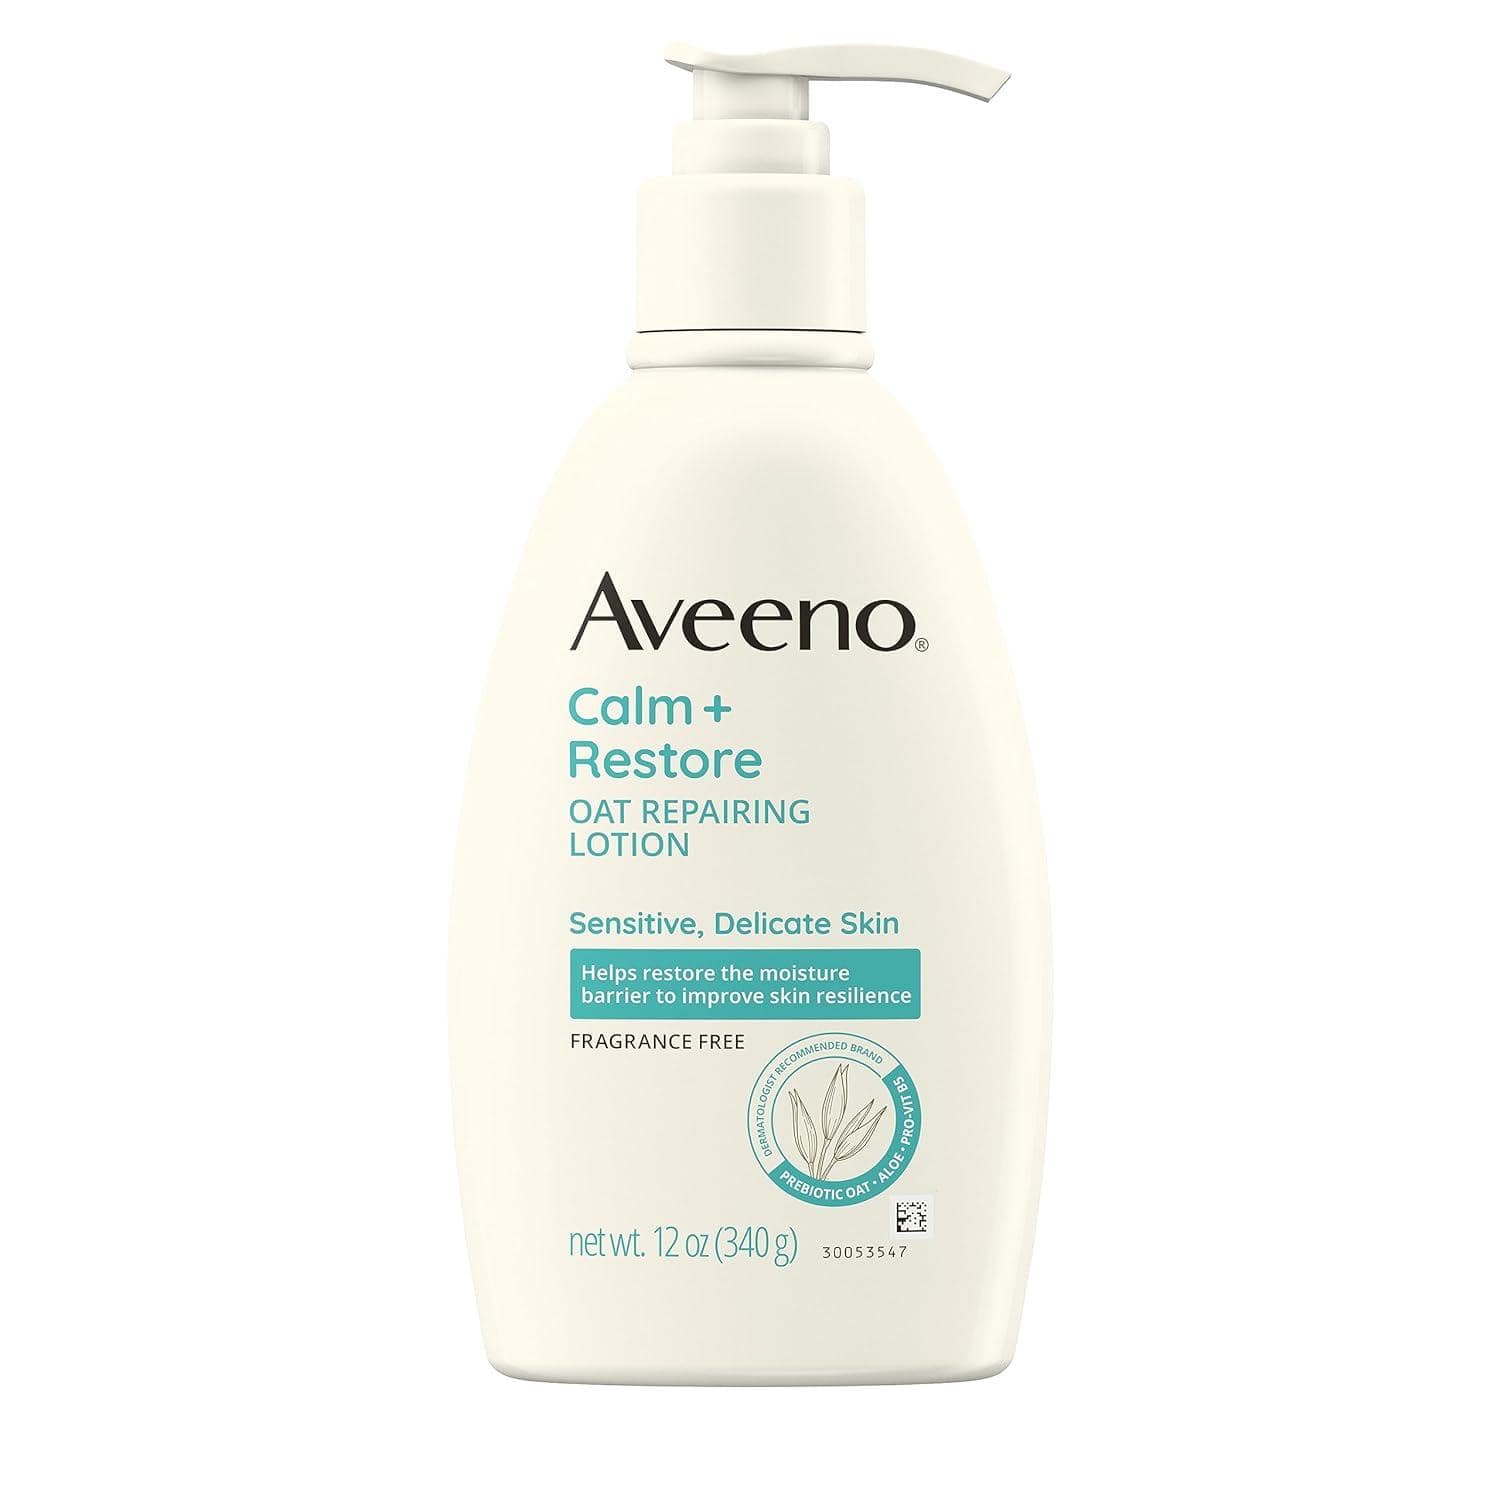 Aveeno's Eczema Therapy Daily Moisturizing Cream is my go-to—a soothing oasis for dry, itchy skin, enriched with ceramides and triple oat blend, offering comfort in every application.